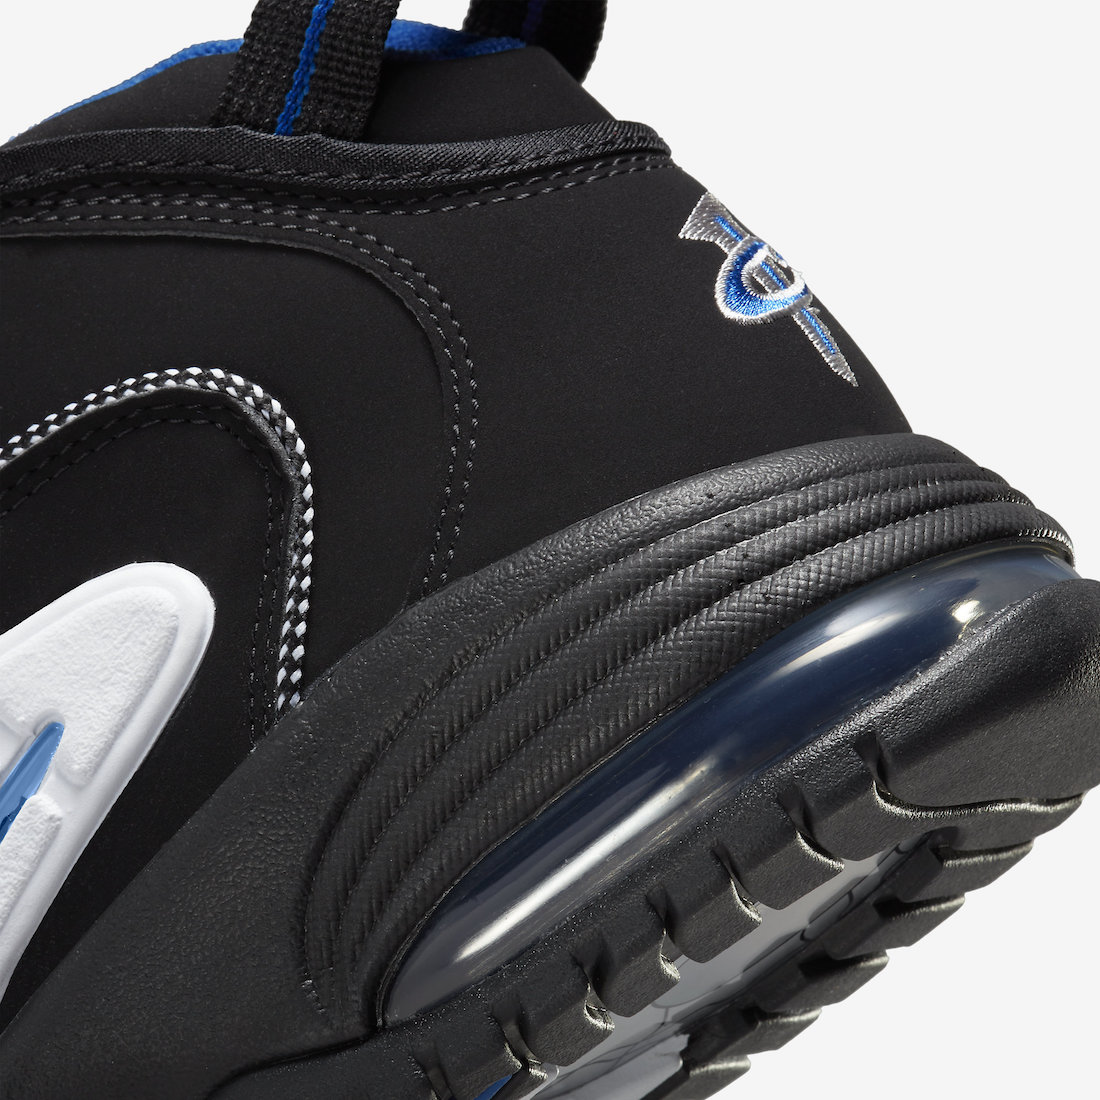 Nike Air Max Penny 1 Orlando 2022 DN2487 001 Release Date 7